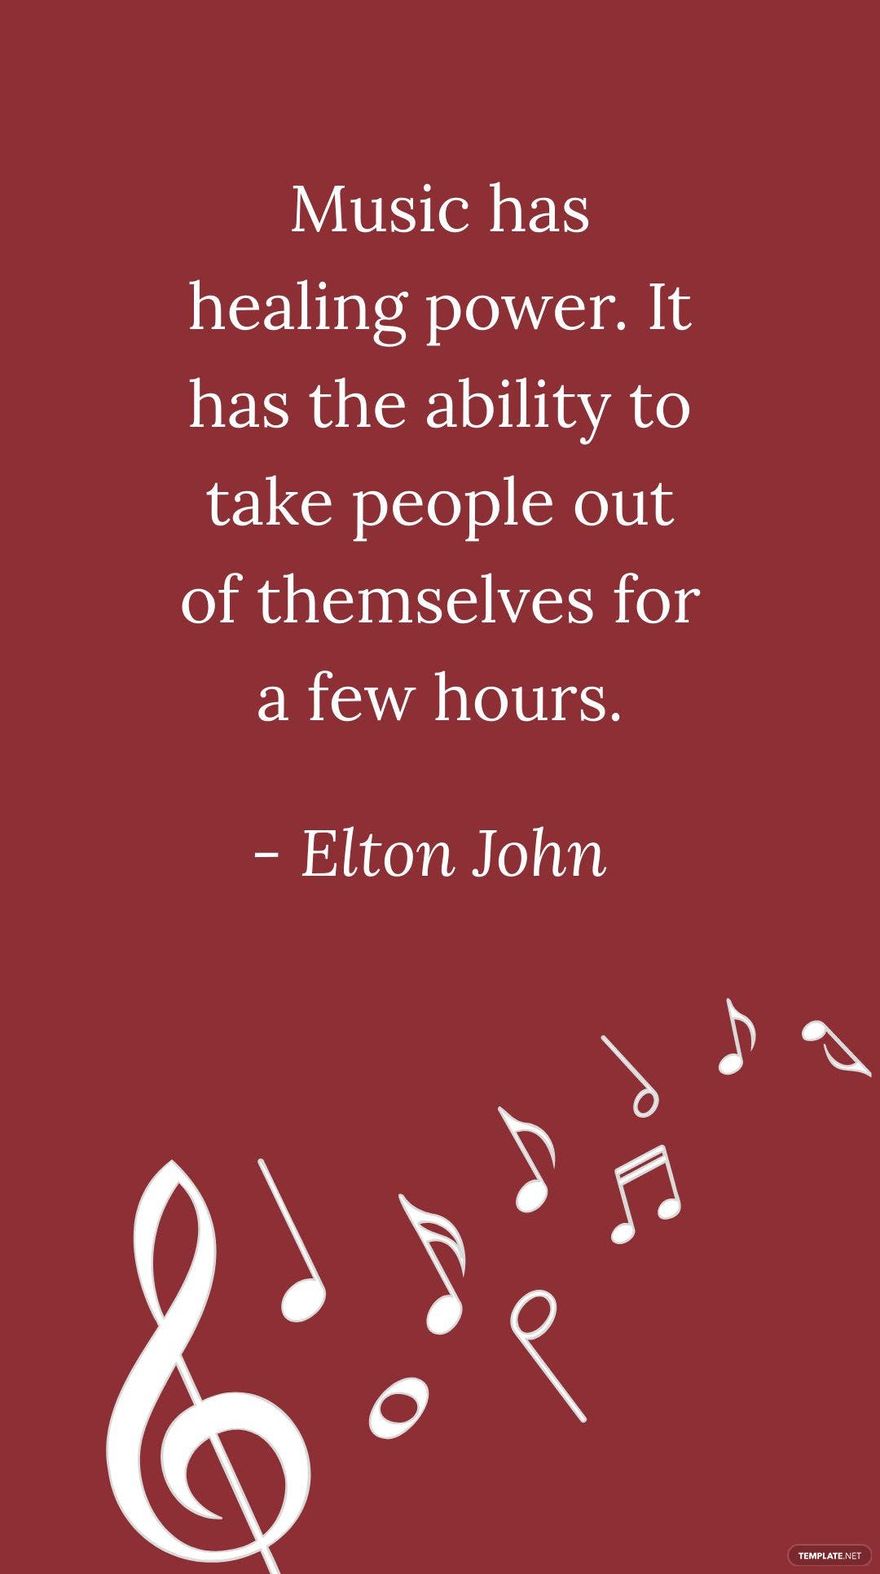 Free Elton John - Music has healing power. It has the ability to take people out of themselves for a few hours. in JPG